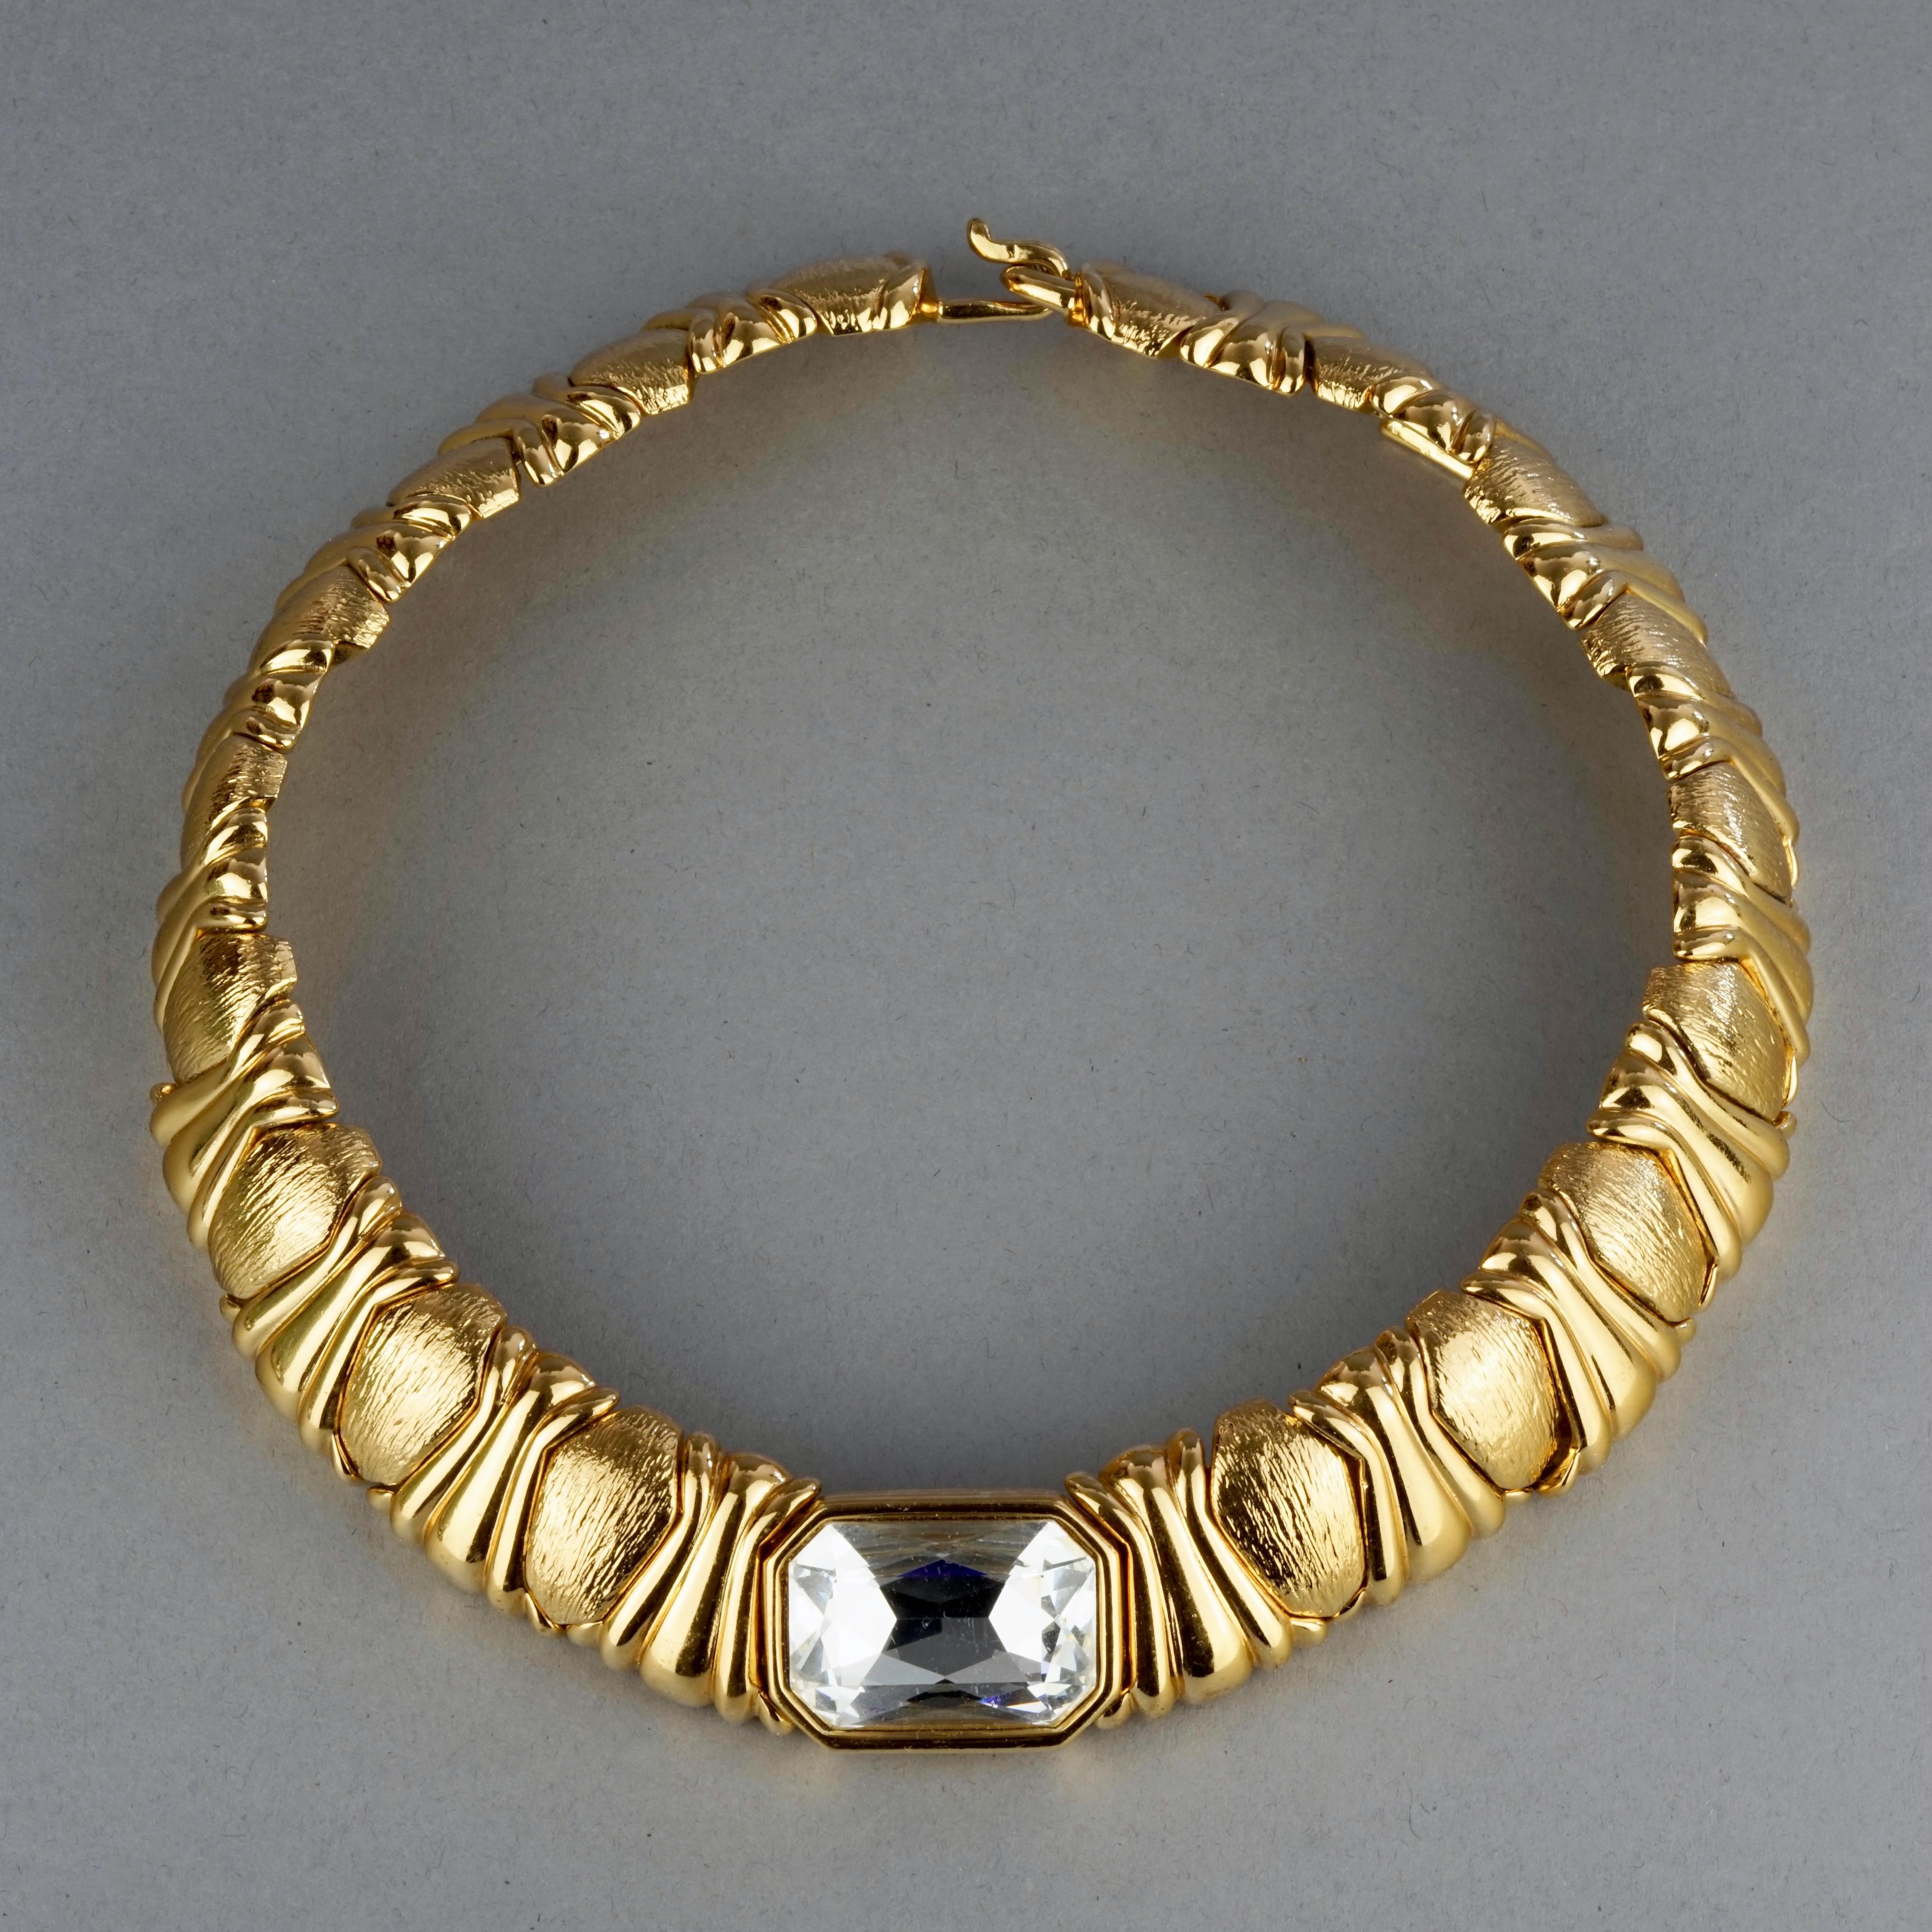 Vintage YVES SAINT LAURENT Ysl Rhinestone Choker Necklace In Excellent Condition For Sale In Kingersheim, Alsace